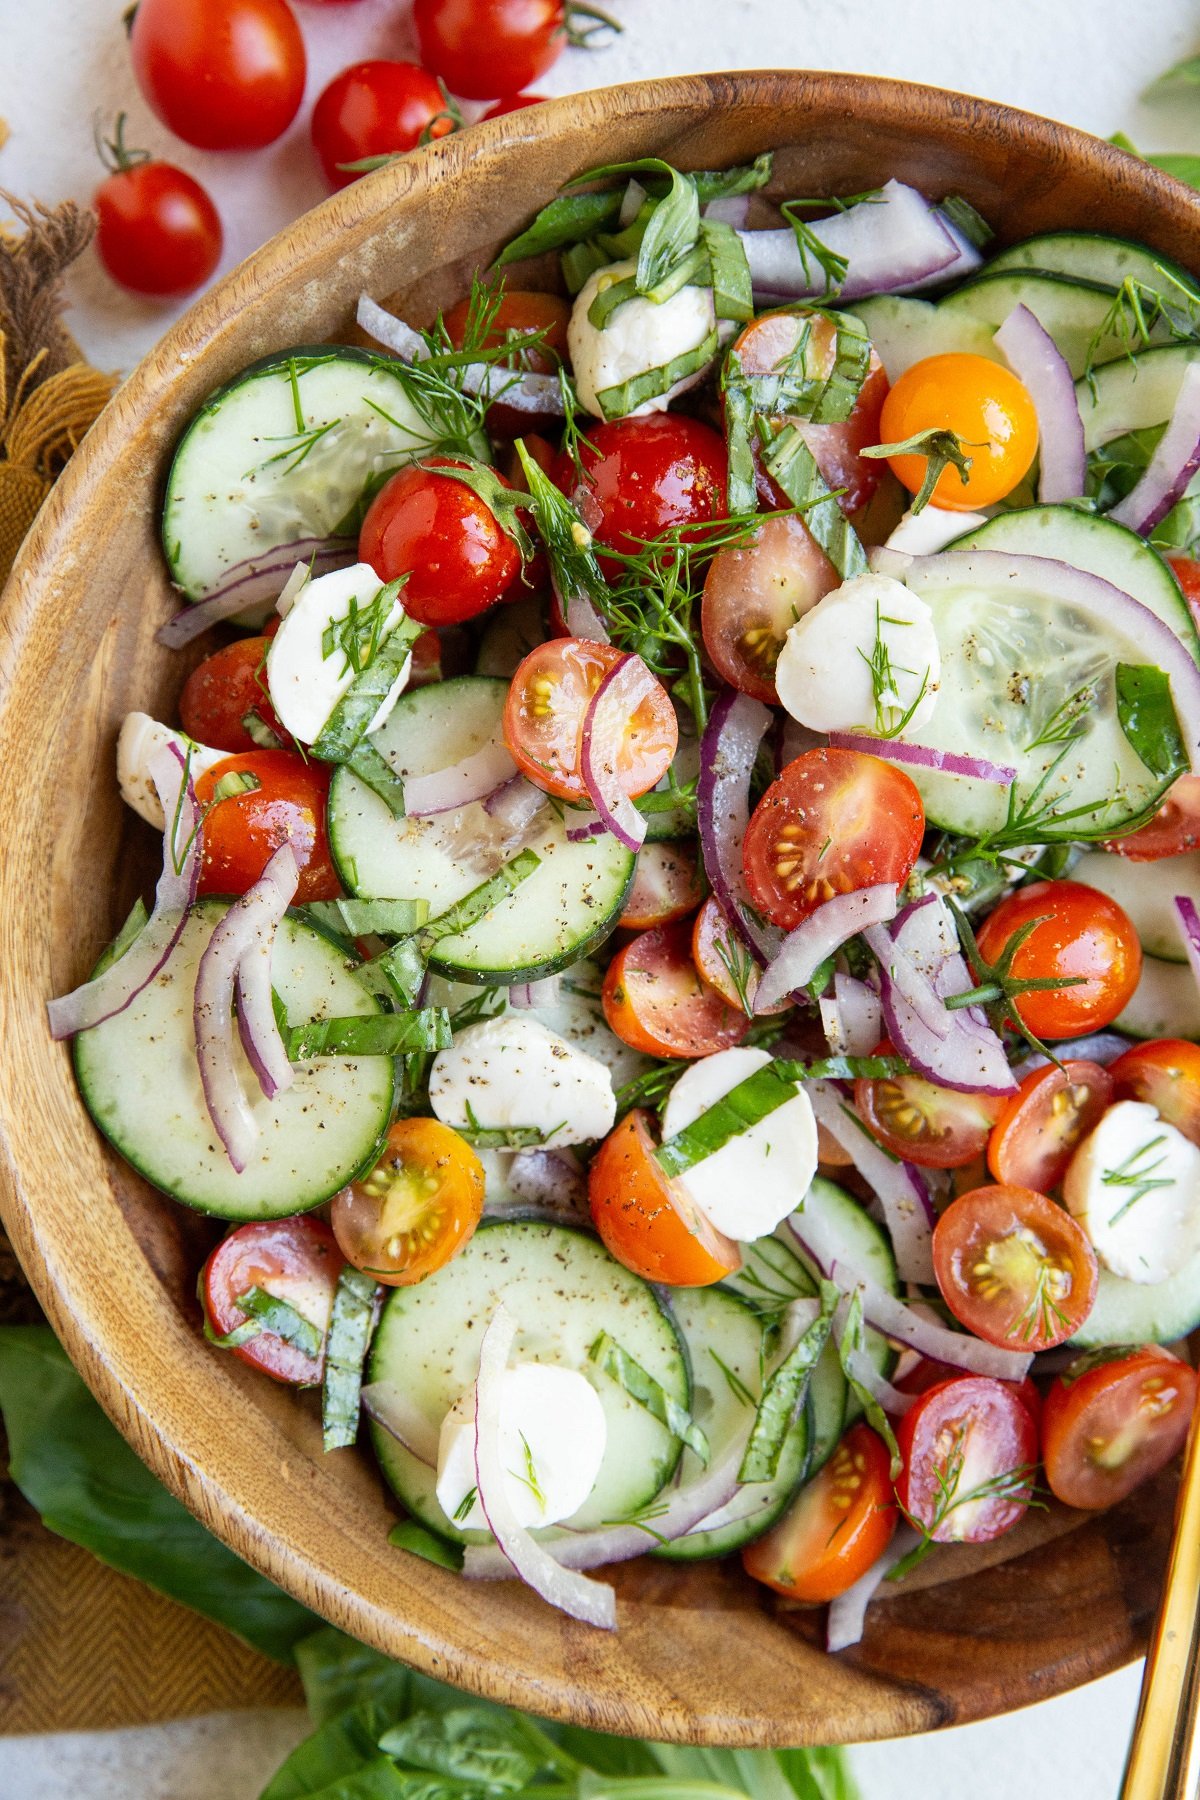 Cucumber tomato salad in a wooden bowl with red onion, mozzarella cheese and fresh herbs.